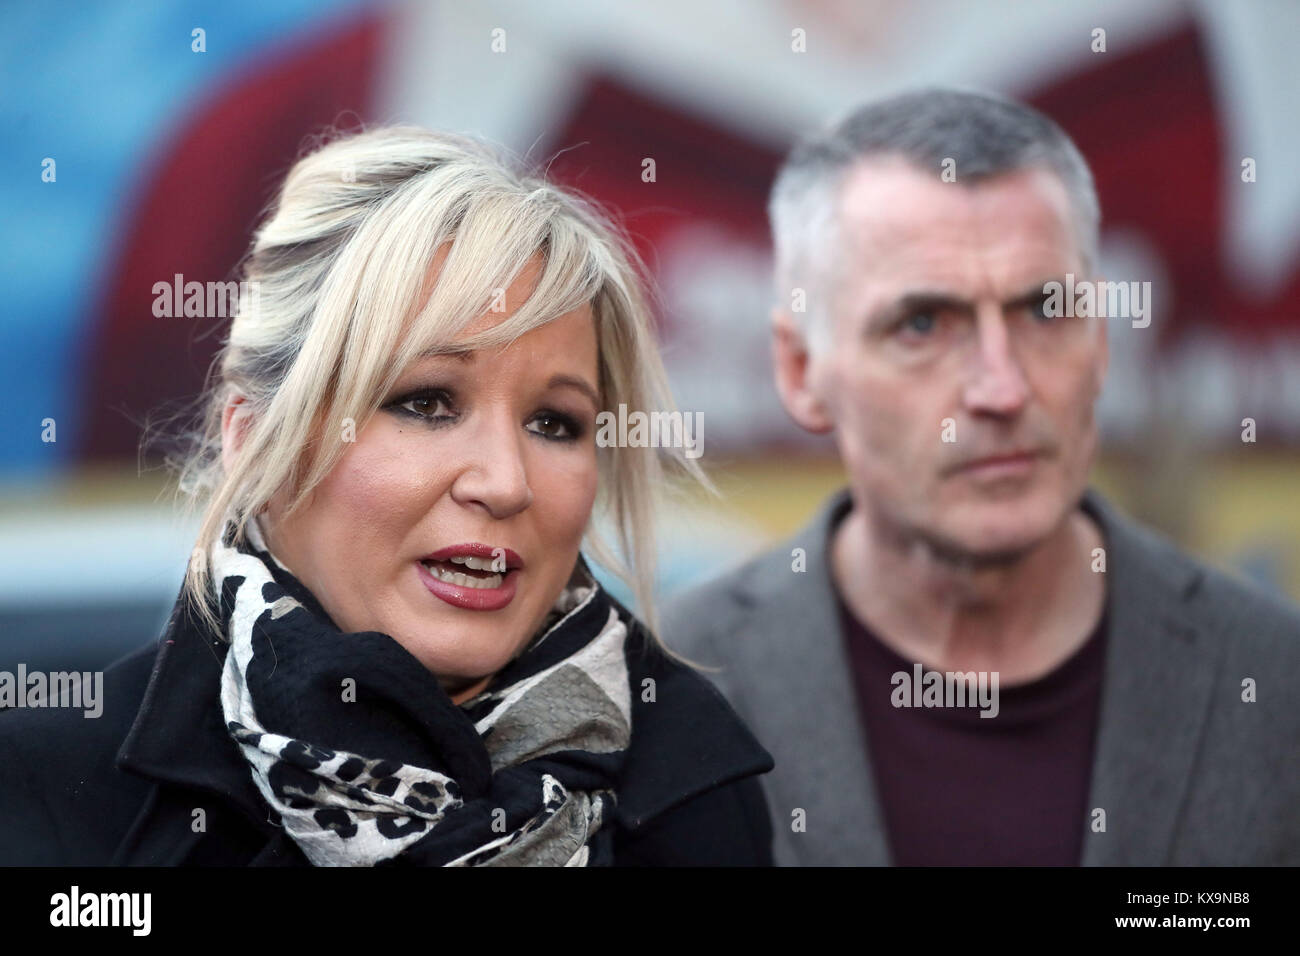 Sinn Fein's Northern Ireland Leader Michelle O'Neill and party chairman Declan Kearney speaking to the media outside Sinn Fein's headquarters on the Falls Road in Belfast after West Tyrone MP Barry McElduff was suspended from all party activity for three months when he posted a social media video of him with a loaf of Kingsmill bread on his head on the anniversary of the Kingsmill massacre. Stock Photo